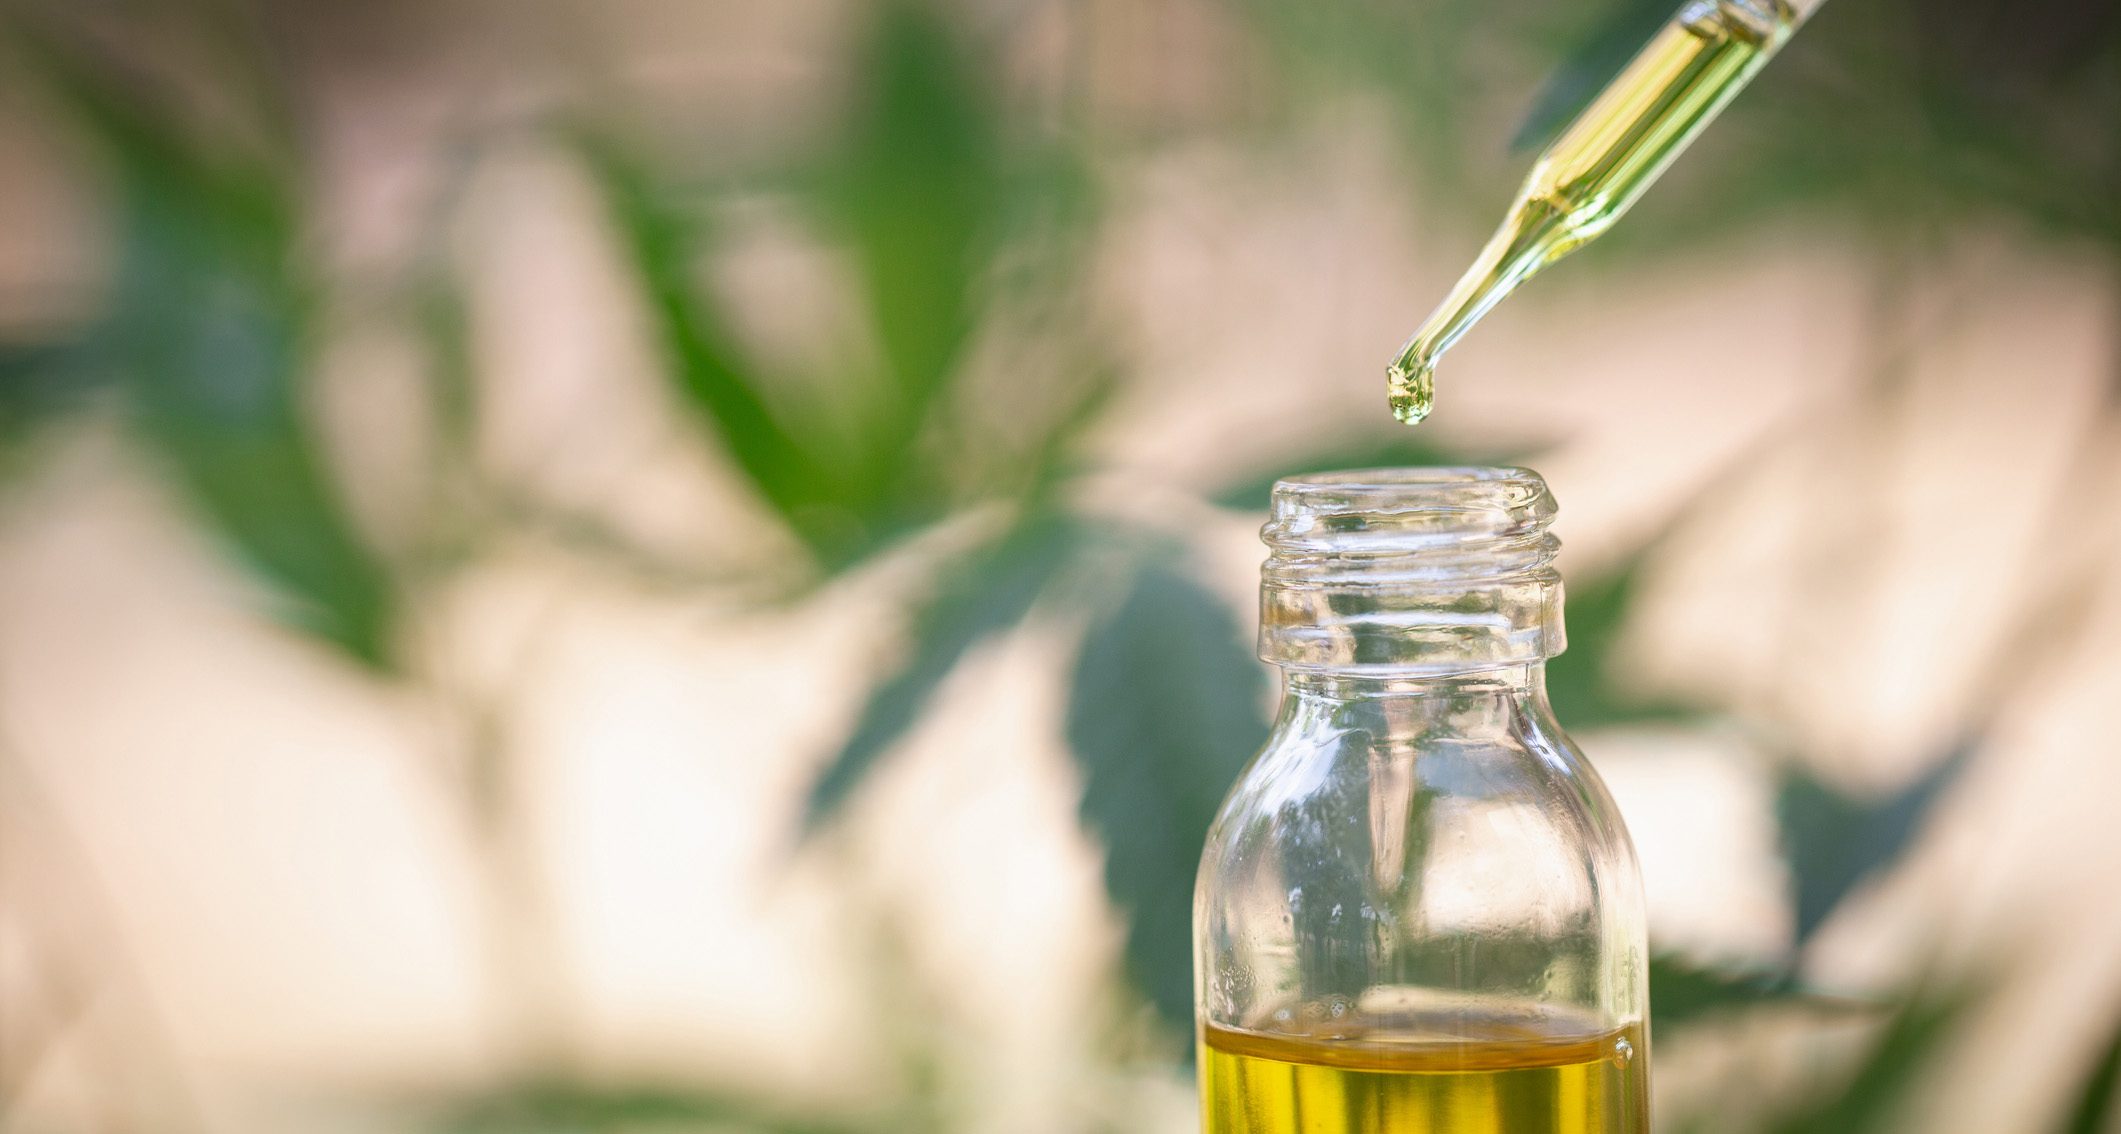 How To Treat Best Cancer With Cbd Oil